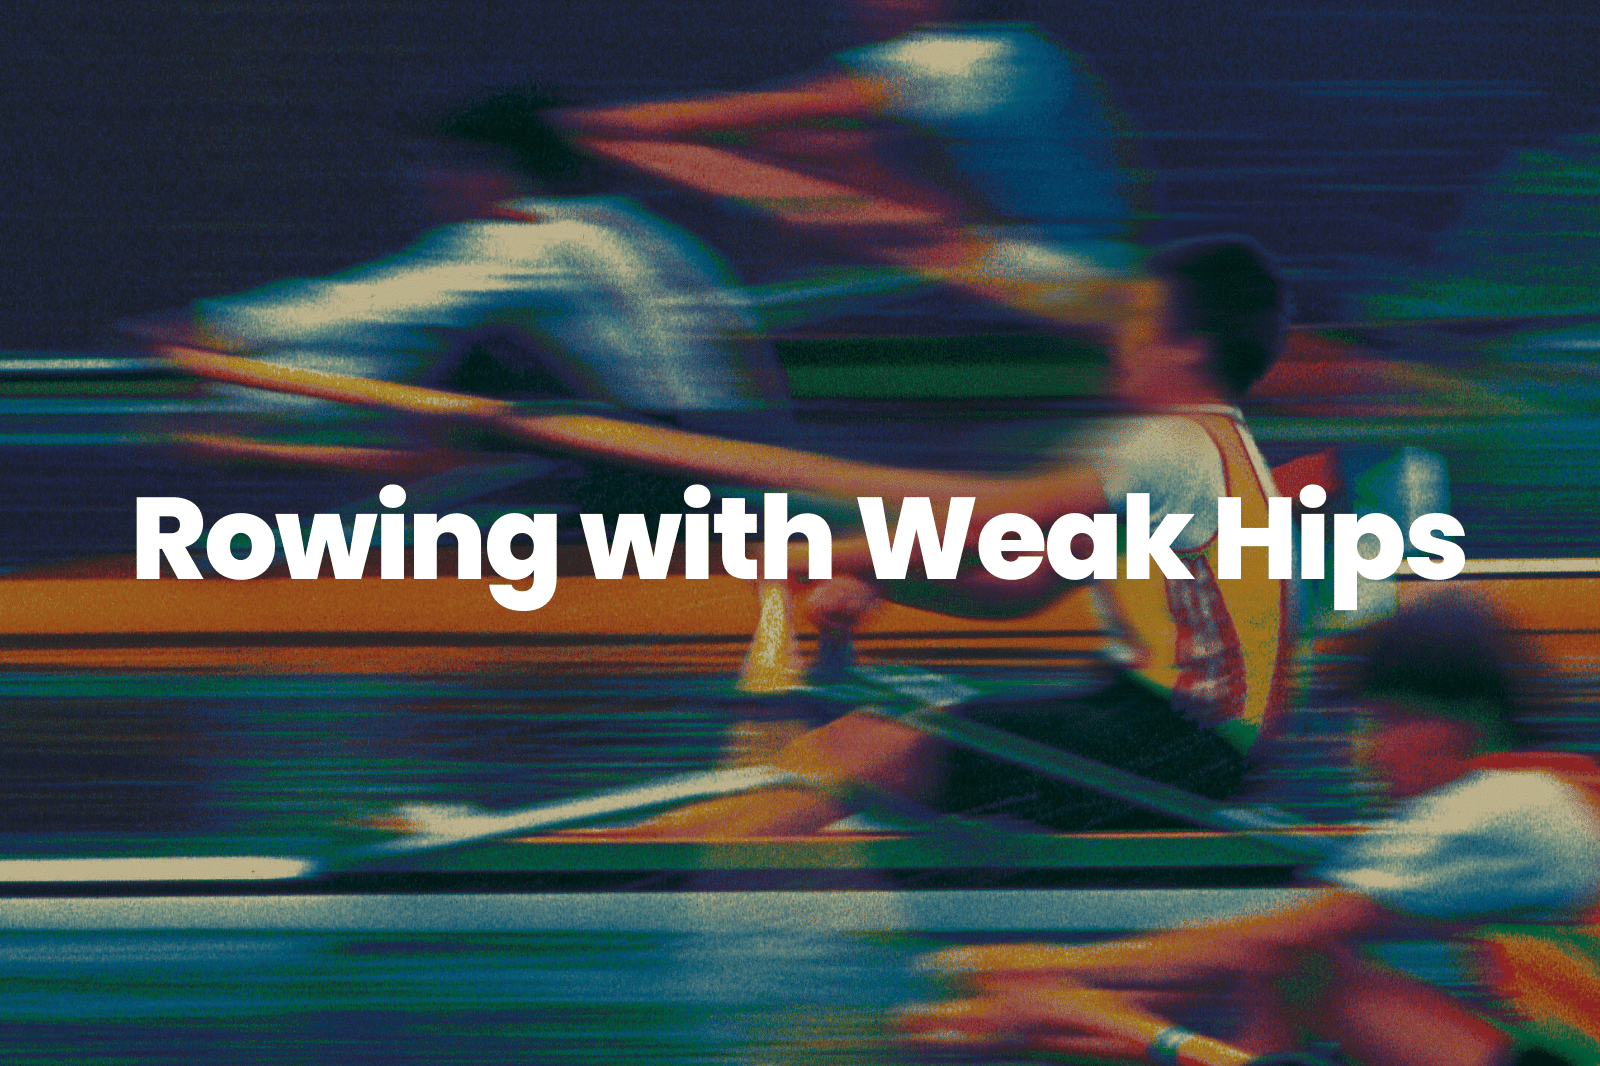 Rowing with Weak Hips